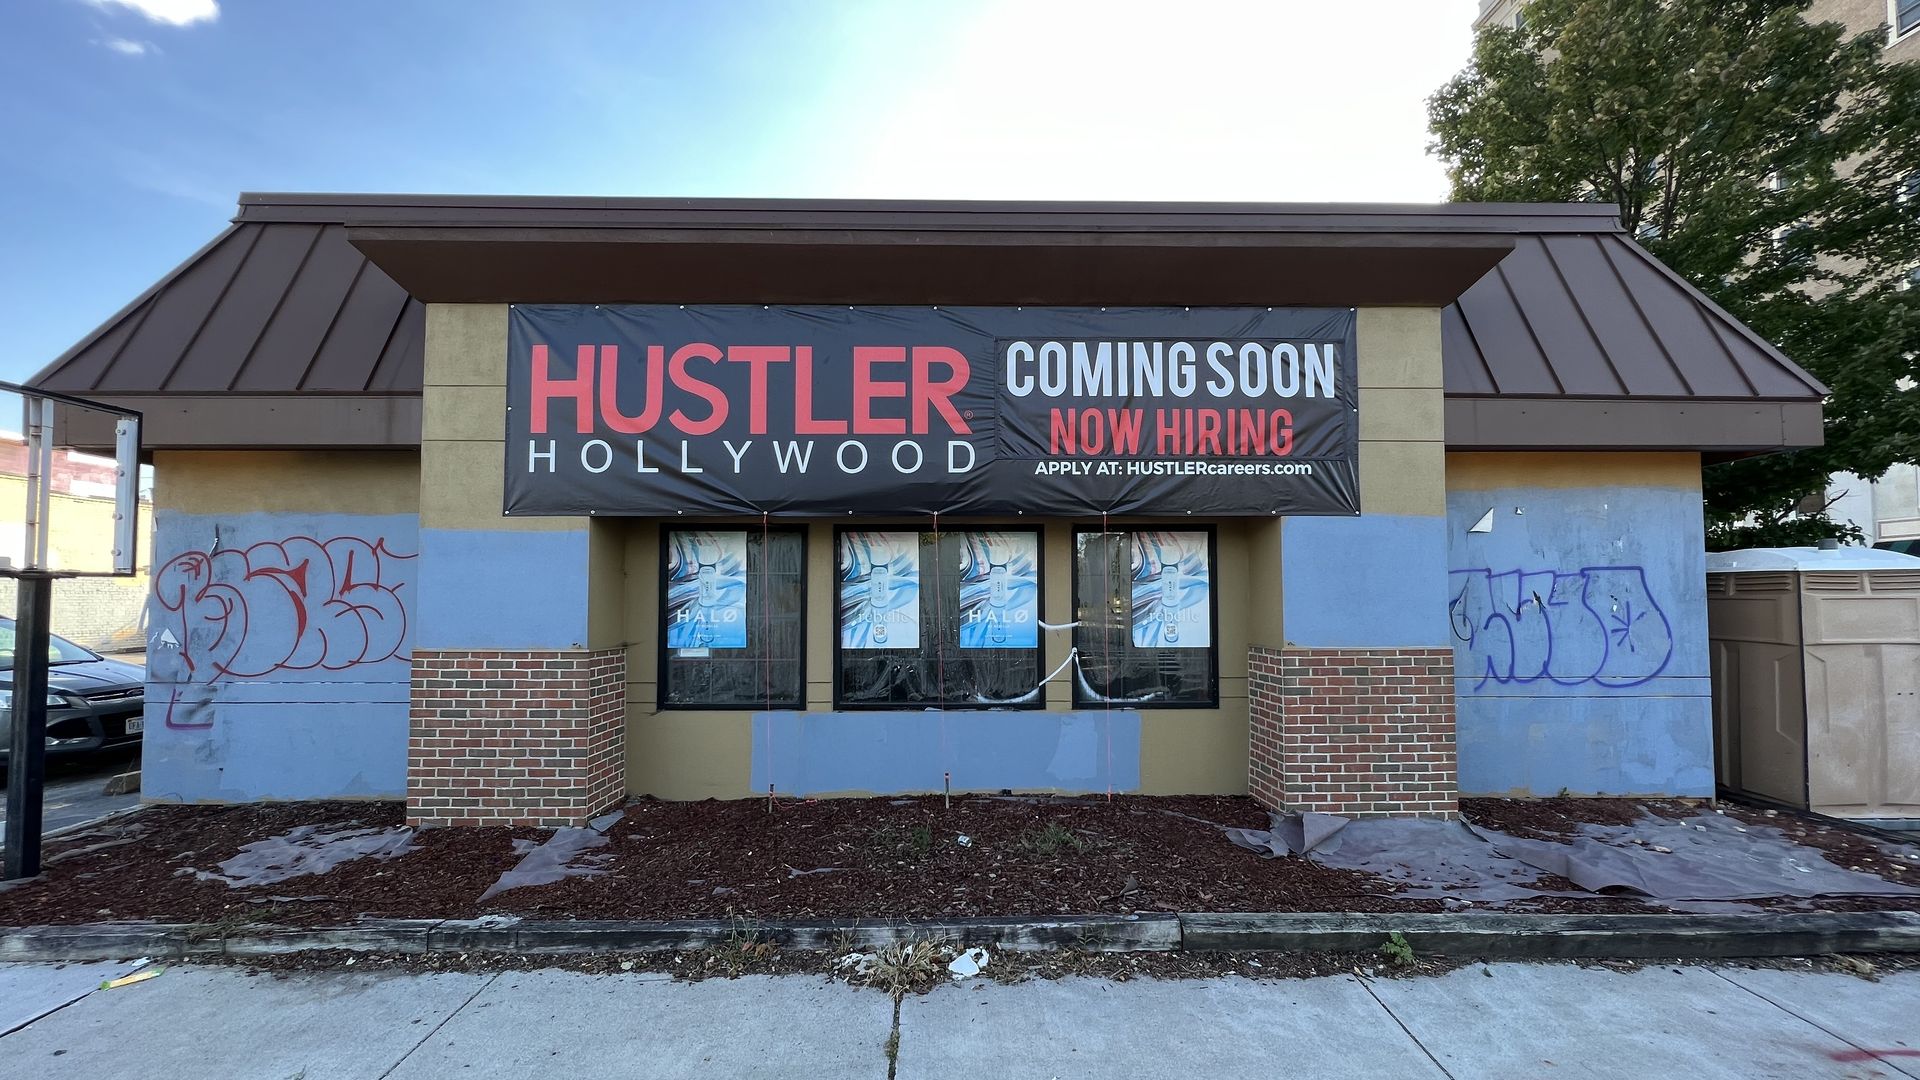 On old pizza hut with graffiti on it and a sign that says Hustler Hollywood coming soon 